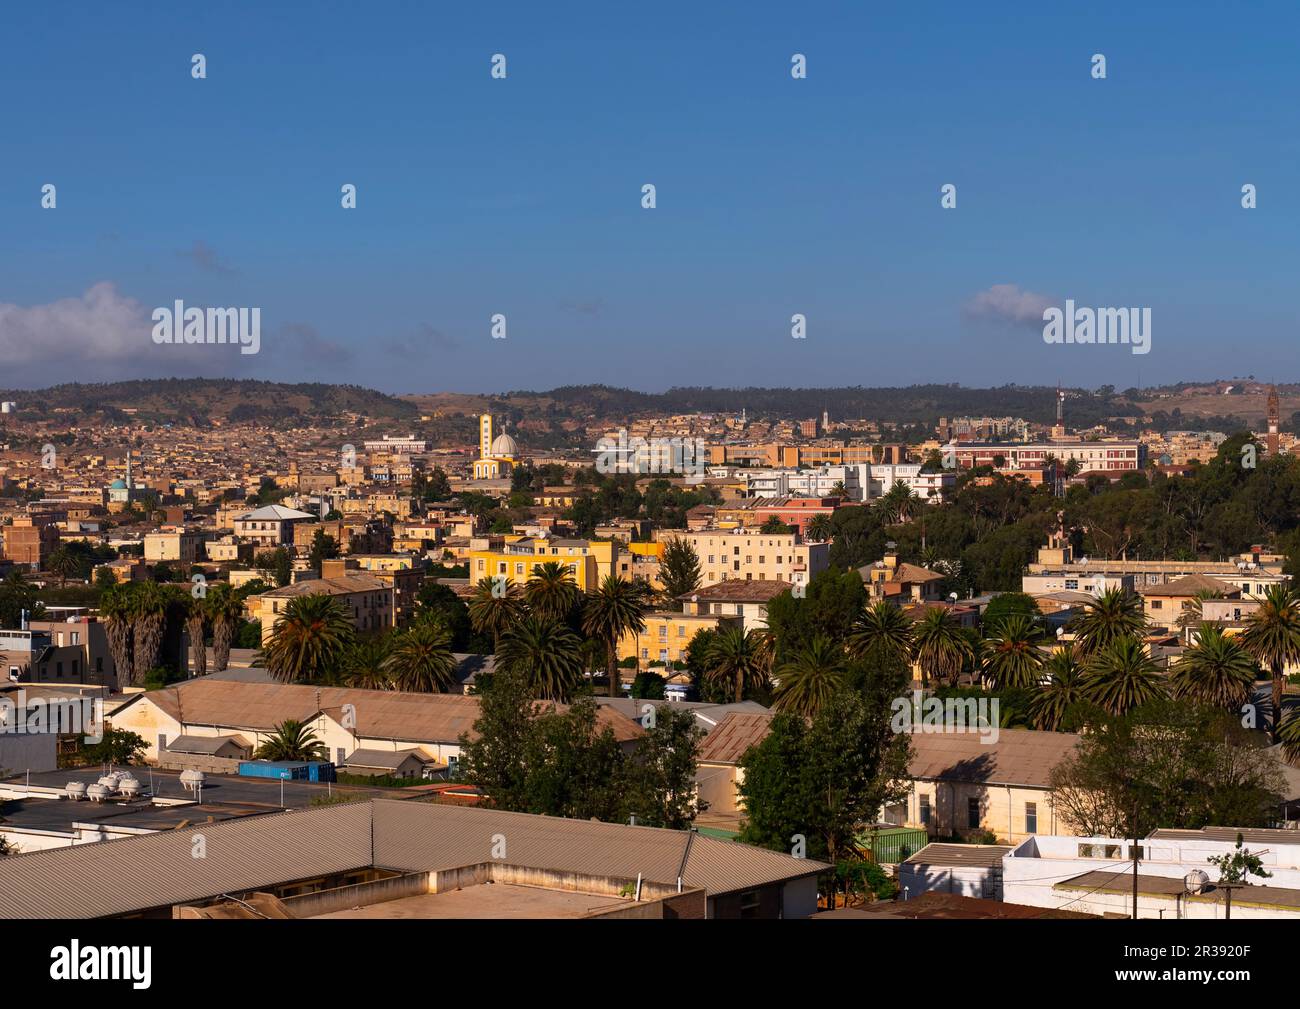 High angle view of the town, Central Region, Asmara, Eritrea Stock Photo